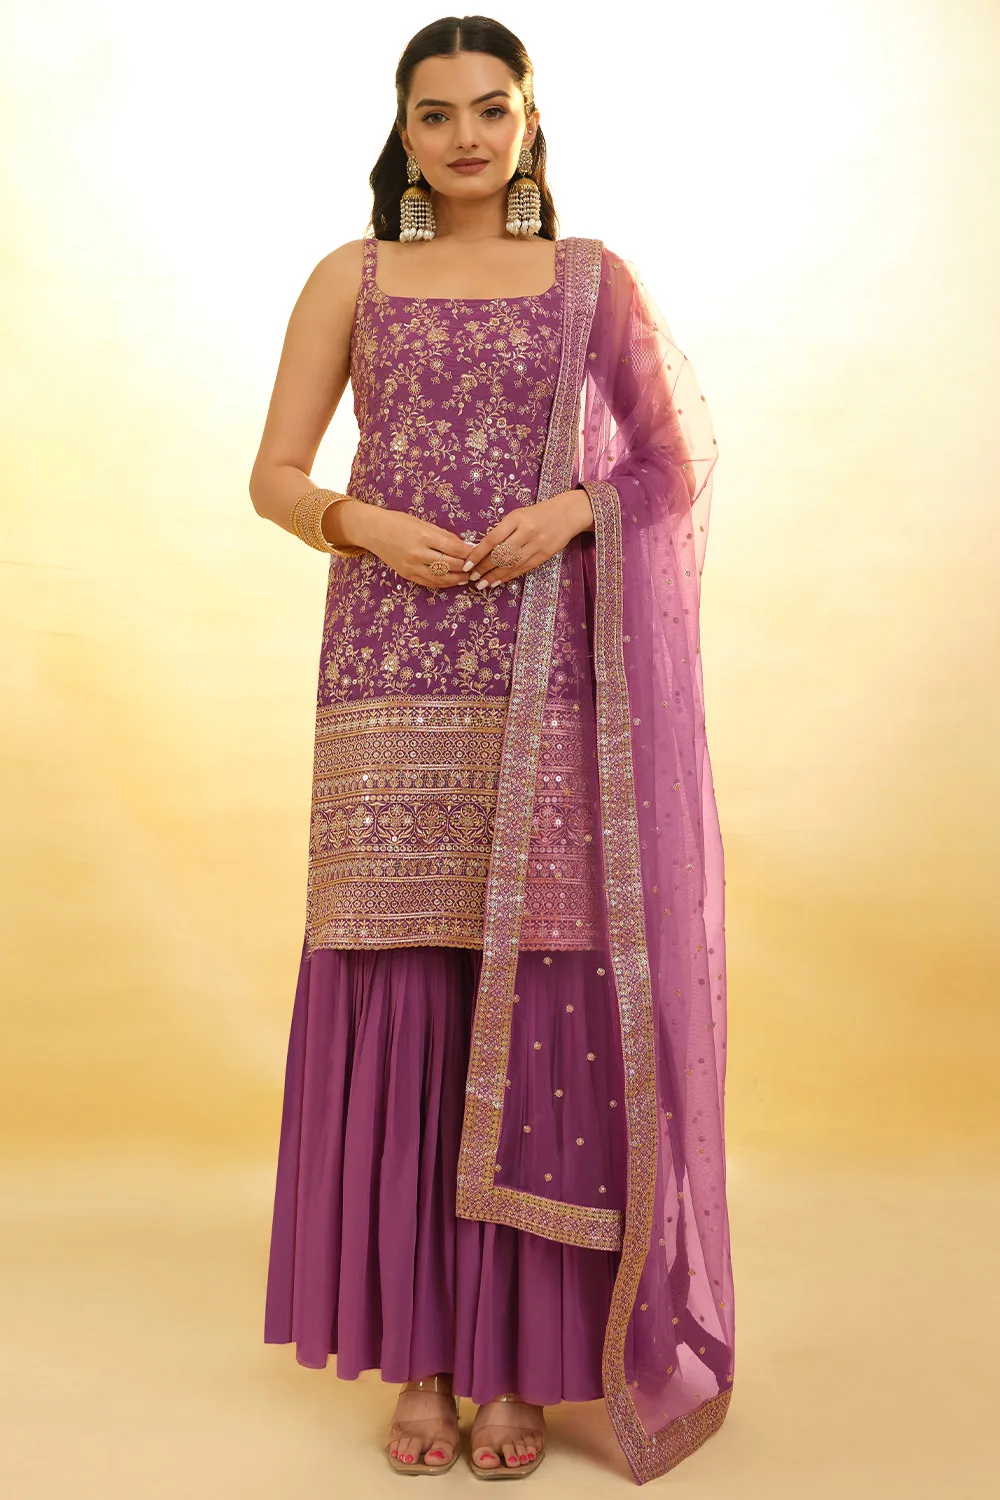 Elegant Pink Georgette Gharara Suit with Intricate Embroidery